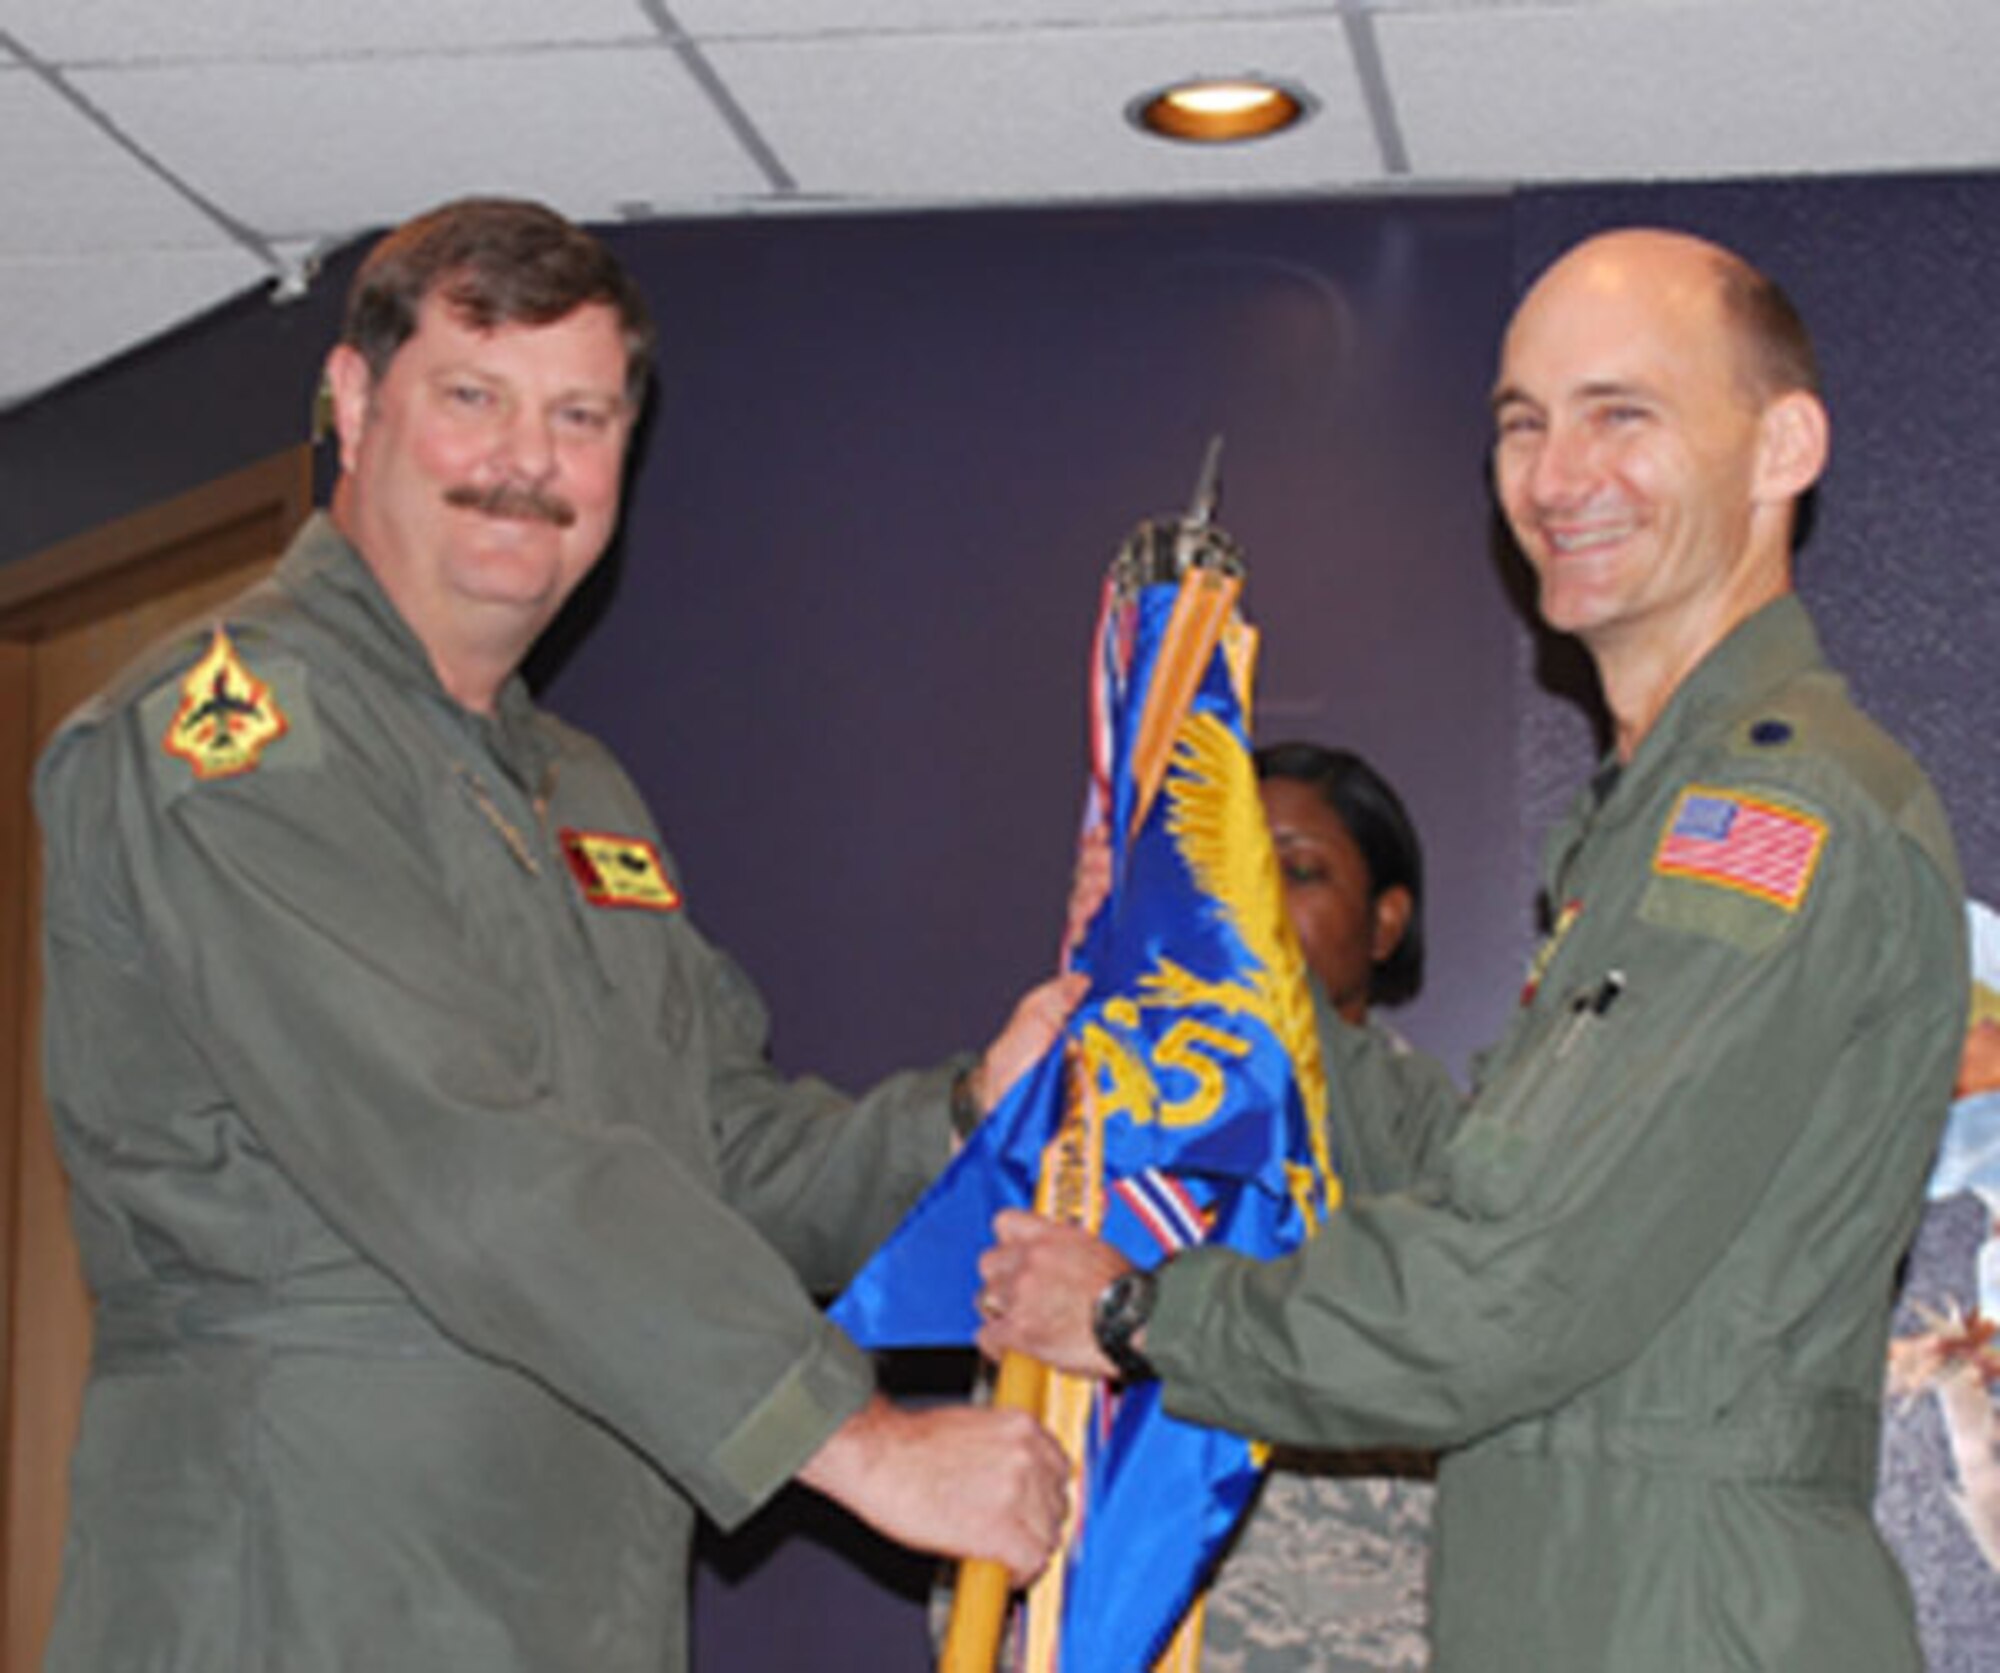 Lt. Col. Thomas Hudnall accepts command of the 465th Air Refueling Squadron on April 10, 2010 from Col. Gregory Gilmour, 507th Operations Group commander.
Hudnall was the former commander of the 507th Operations Support Flight. Hudnall entered the Air Force as a graduate of Louisiana State University’s ROTC program in
1988. He joined the Air Force Reserve in 1997 and is a Command Pilot with more than 4,300 hours, including over 1,000 in combat and combat support. He has flown the T-37, T-38, EC-135Y/N and the KC-135 aircraft. 